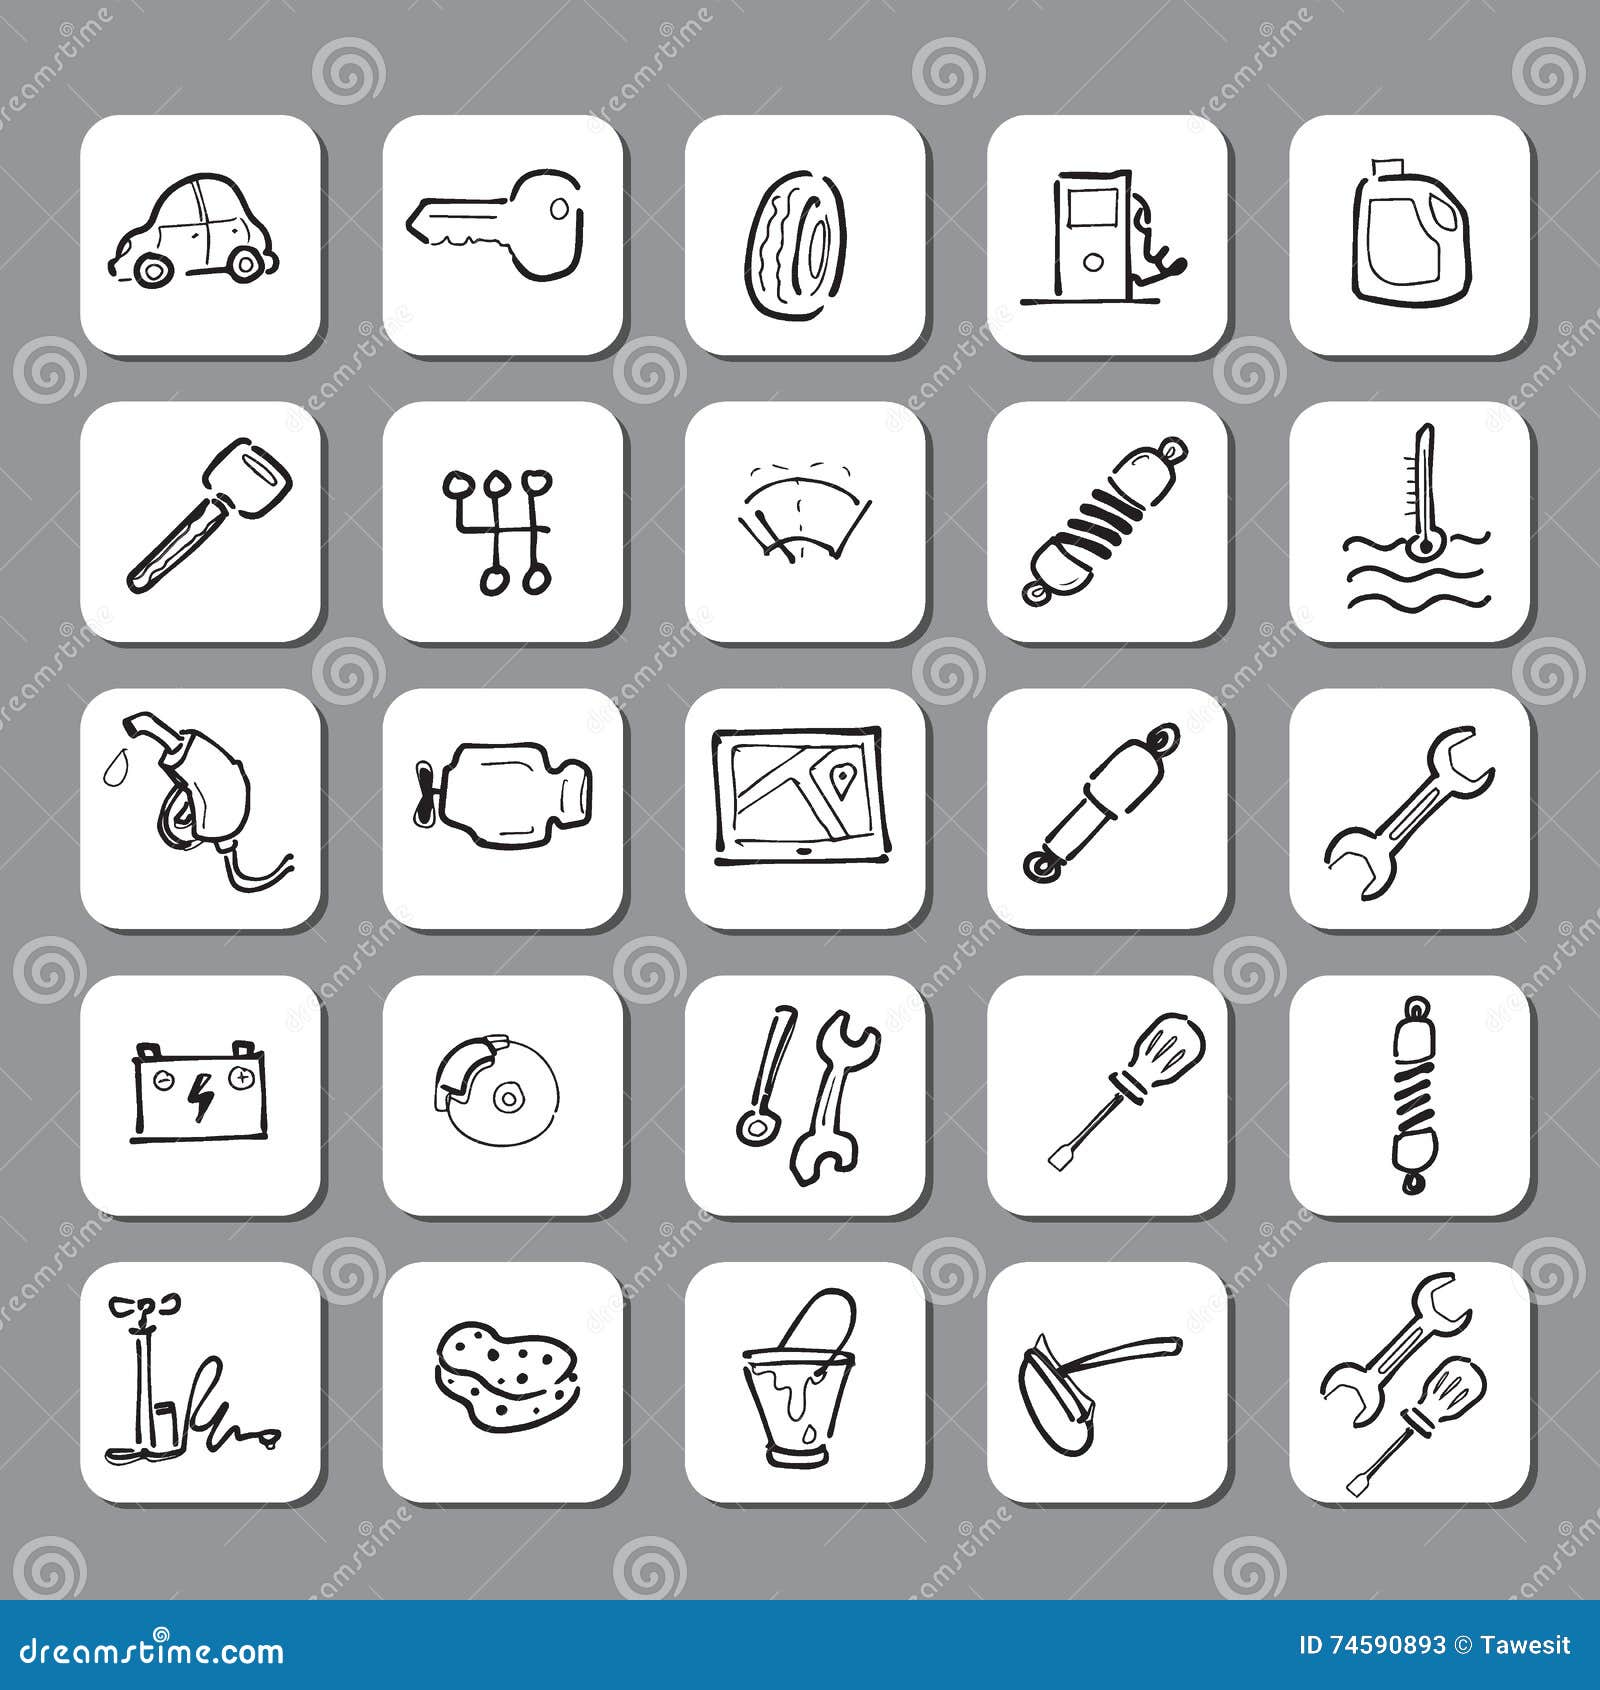 Car And Vehicle Parts Icons Set 1 Stock Vector Illustration Of